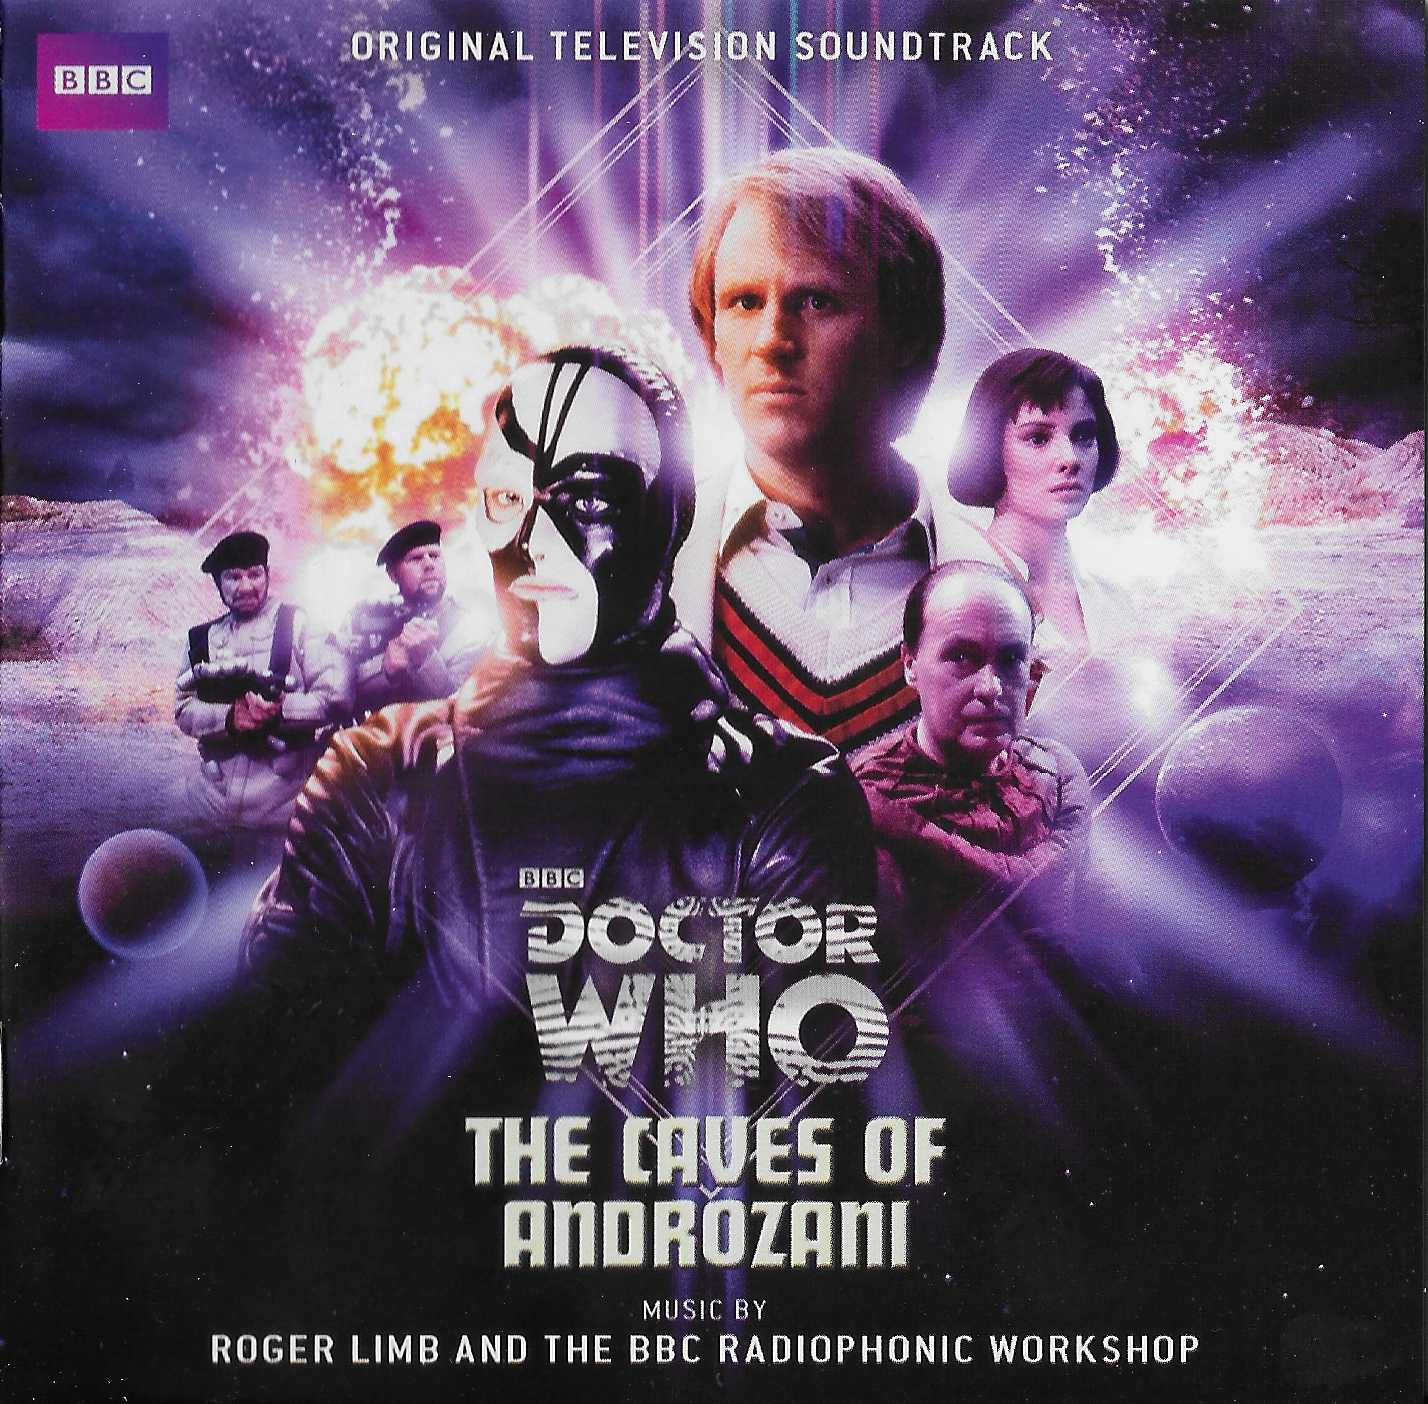 Picture of SILCD 1370 Doctor Who - The caves of Androzani by artist Roger Limb from the BBC records and Tapes library